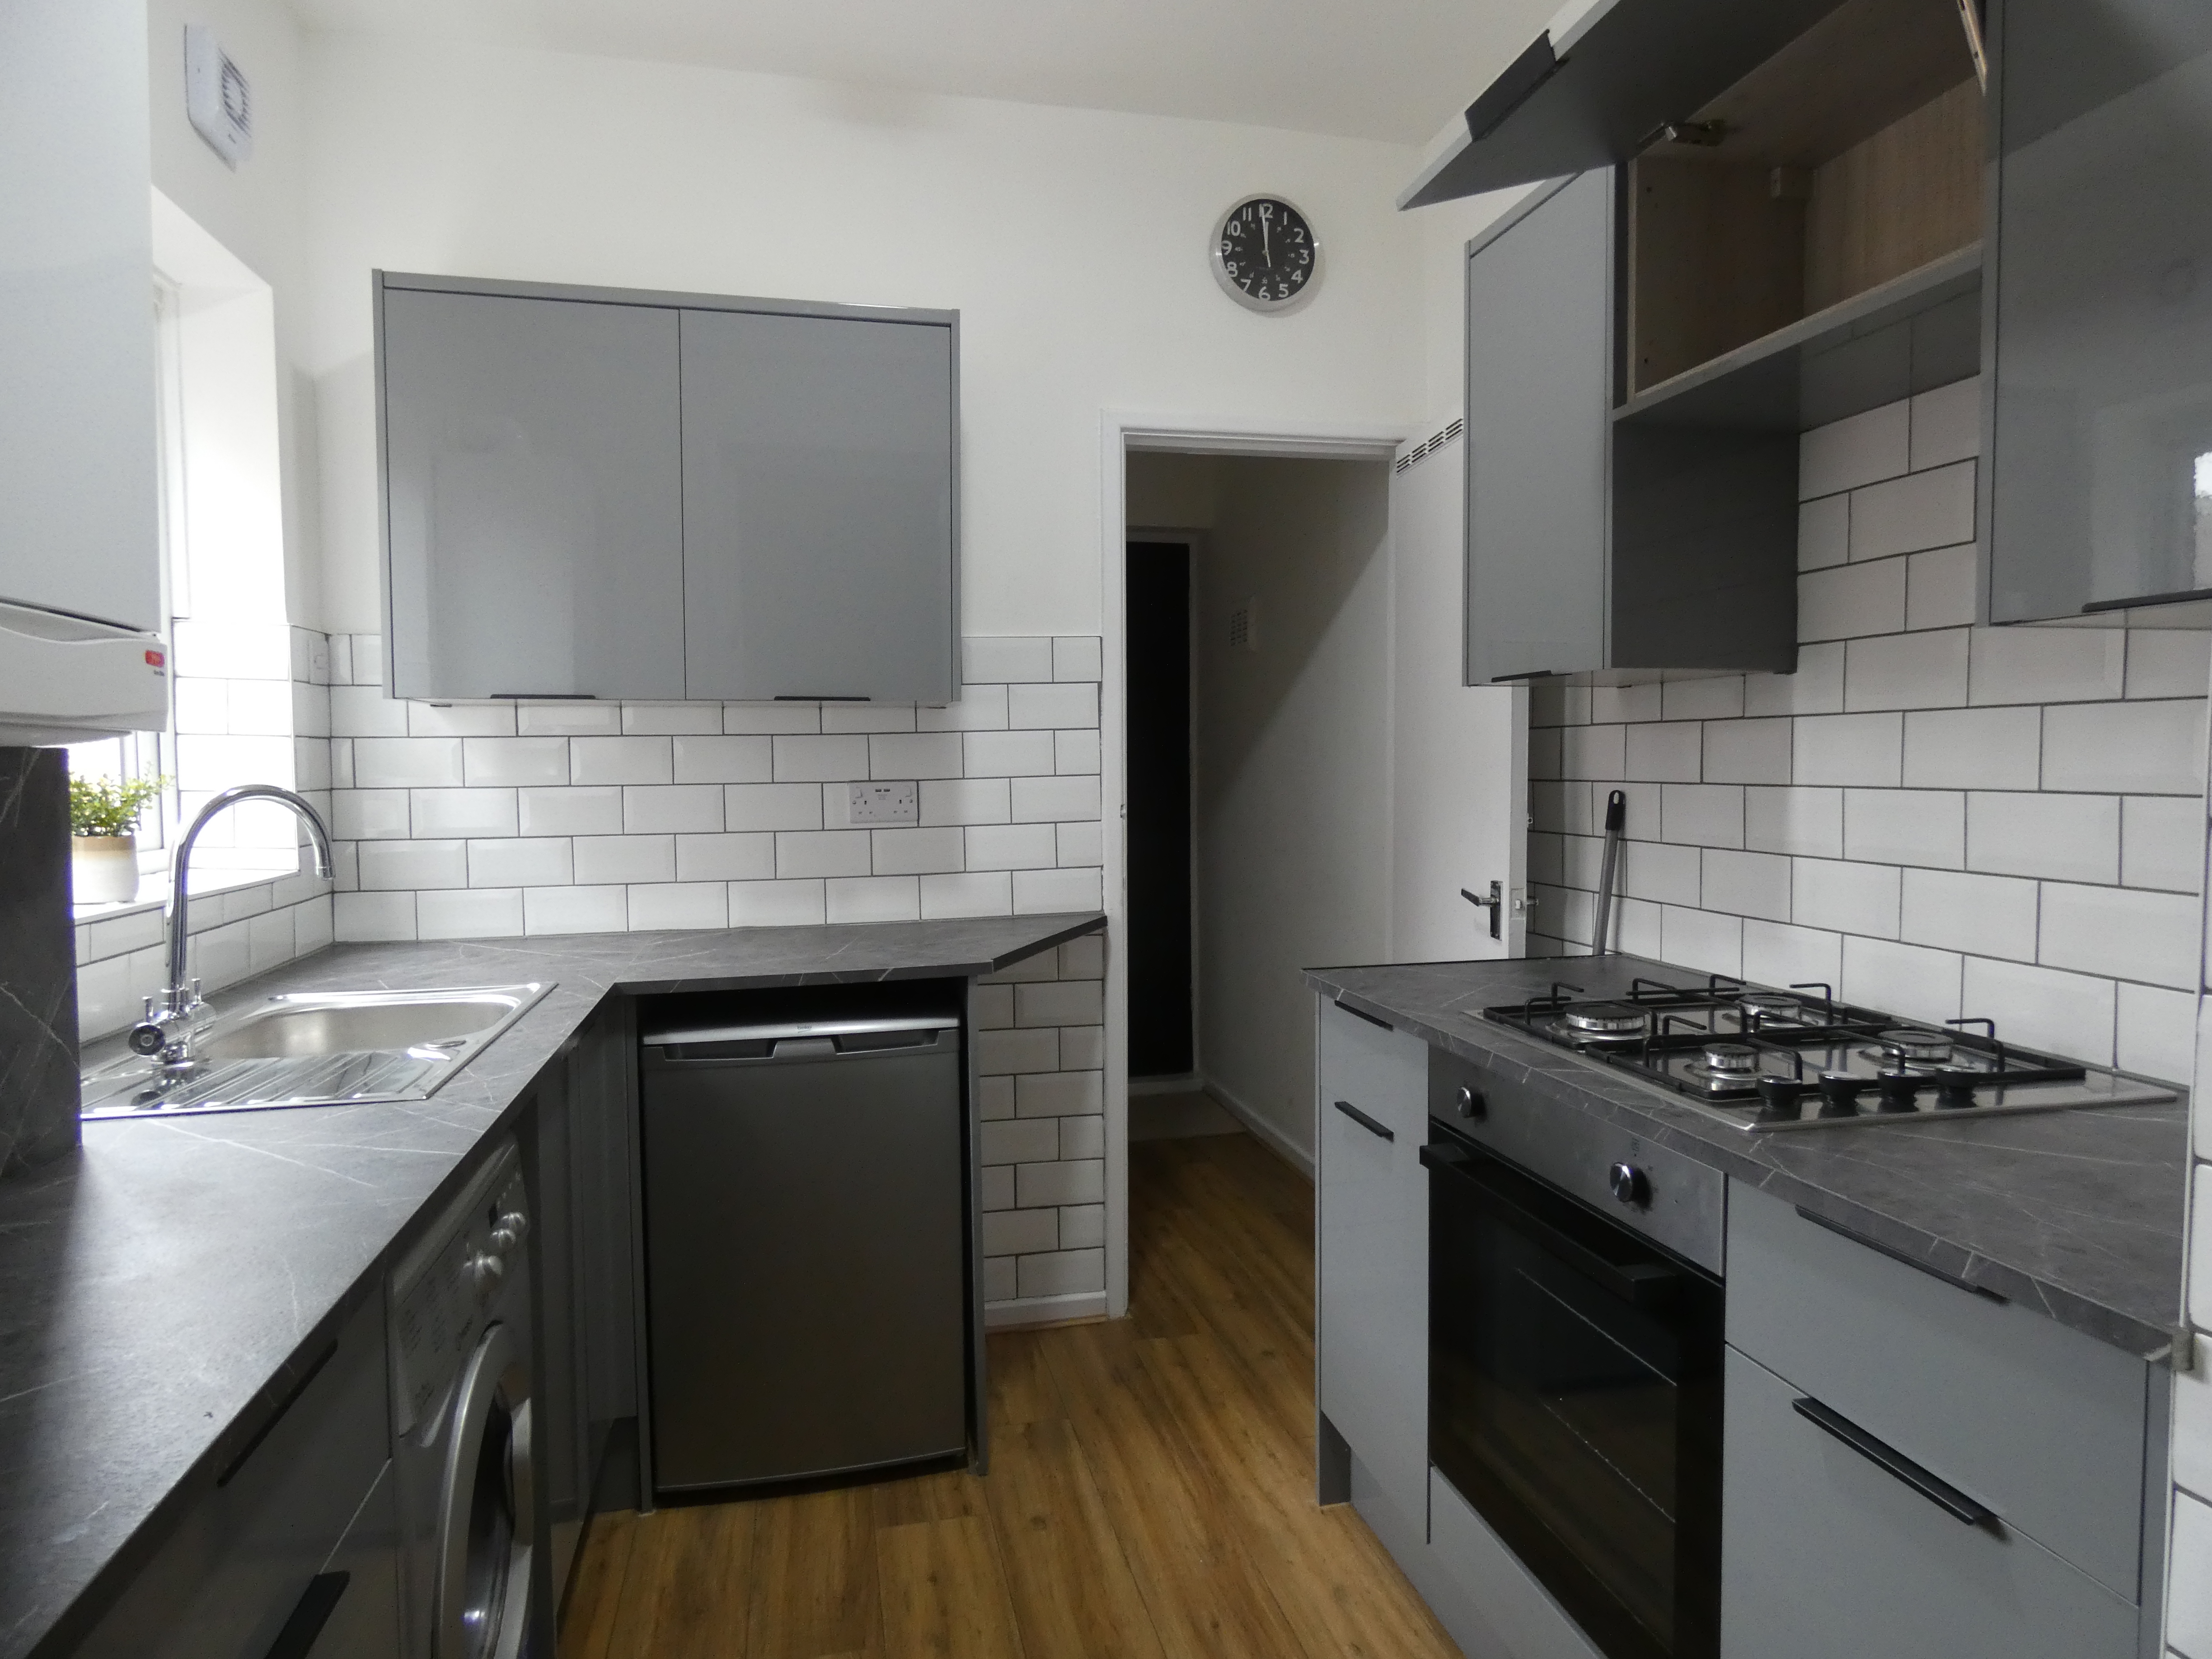 3 bed flat to rent in Warton Terrace, Newcastle upon tyne  - Property Image 1